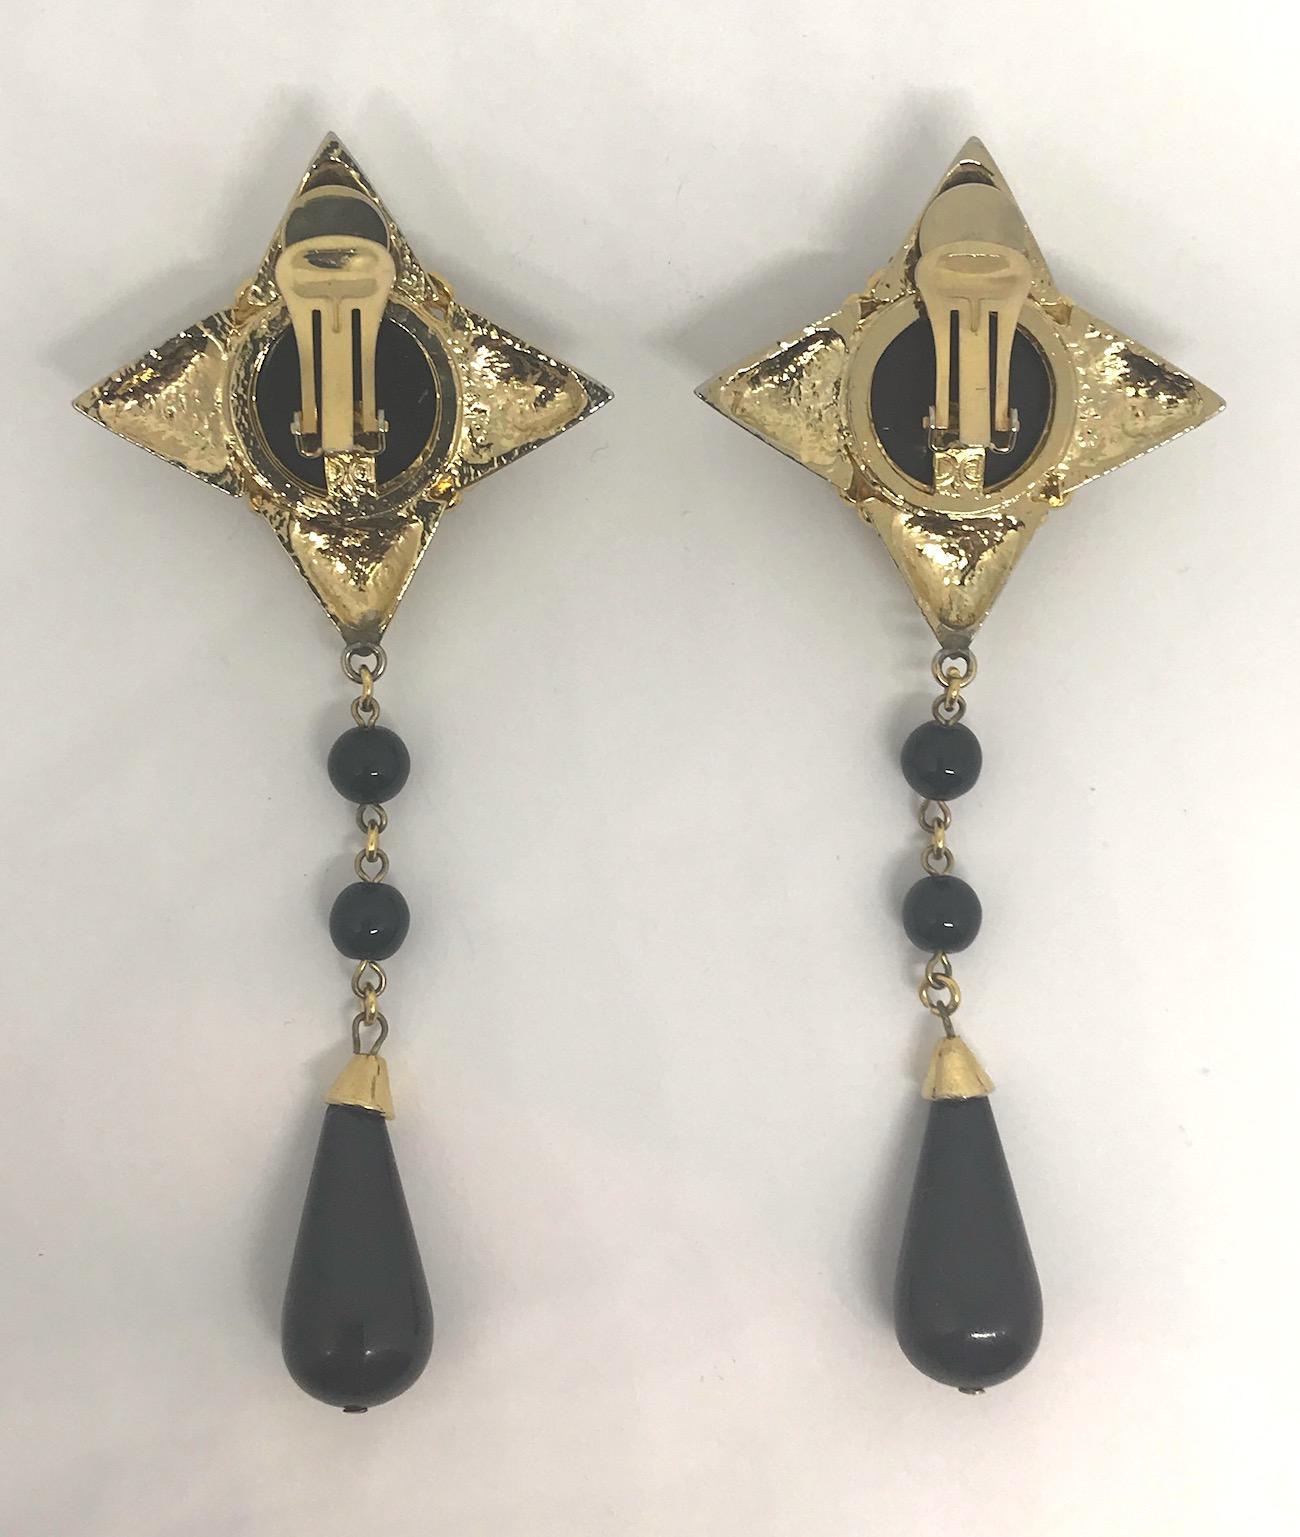 A stunning pair of De Liguoro four point star earrings with large molded lucite black cherry cabochon and black lucite bead pendants from the jewelry collection of Italian actress Elsa Martinelli. Each star is 2 inches wide and high. Including the